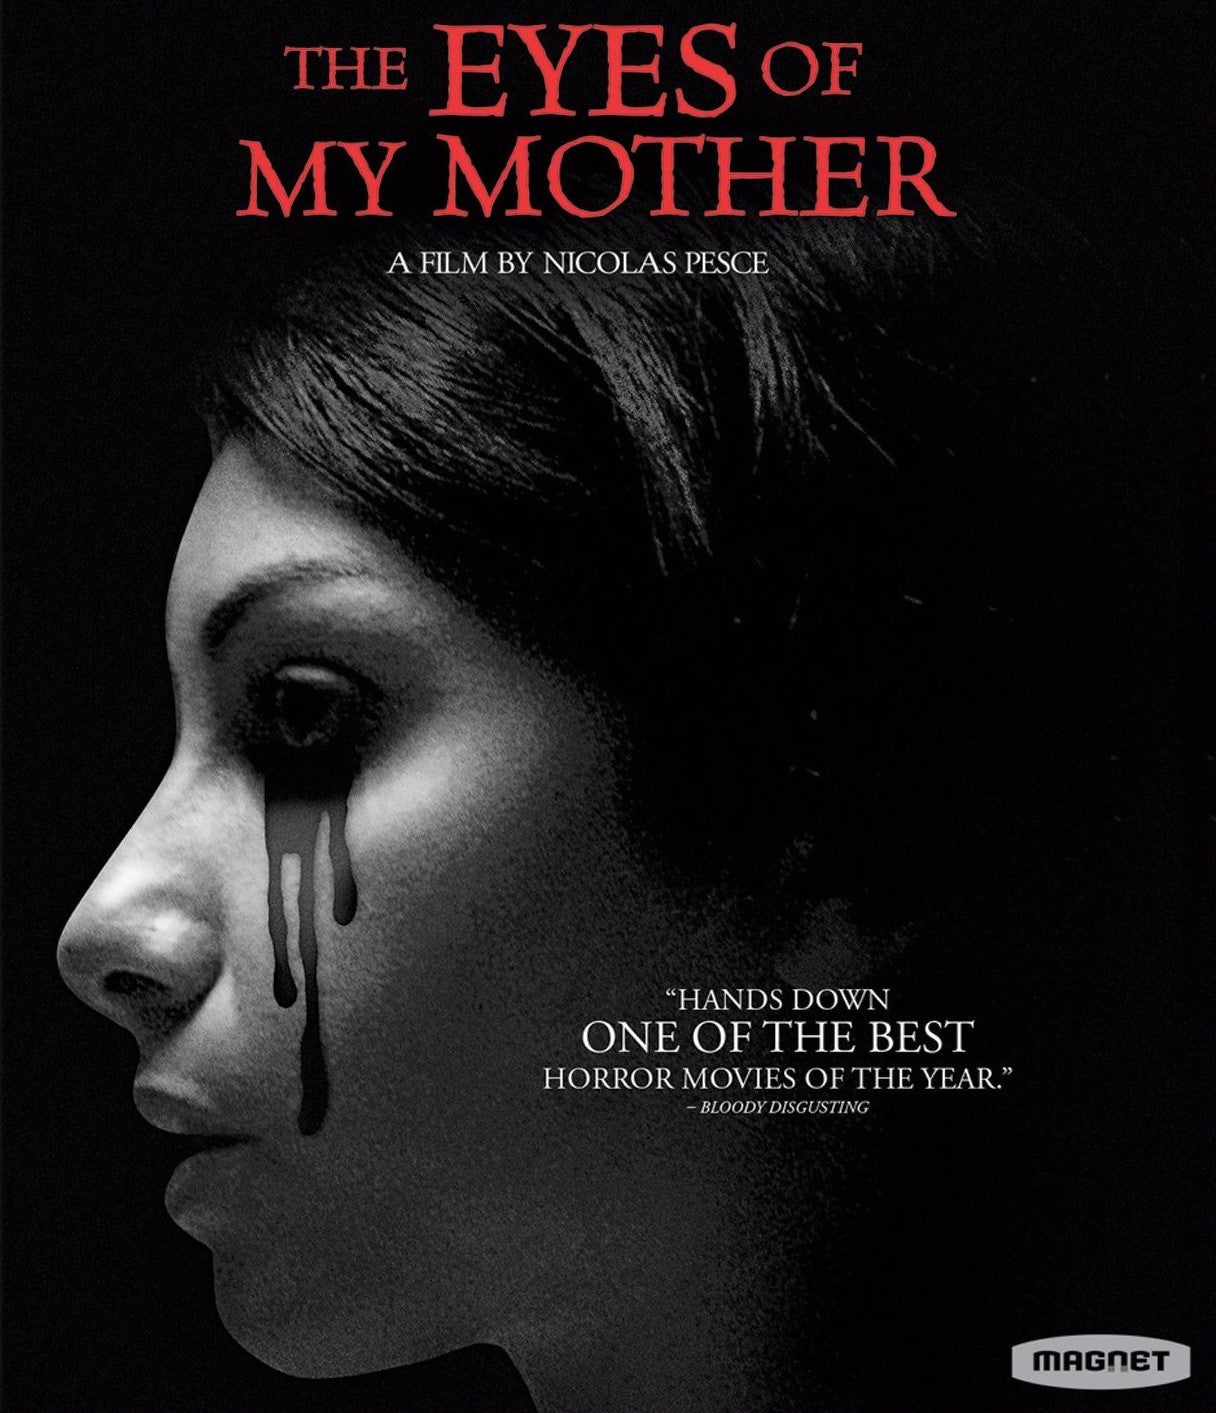 THE EYES OF MY MOTHER BLU-RAY